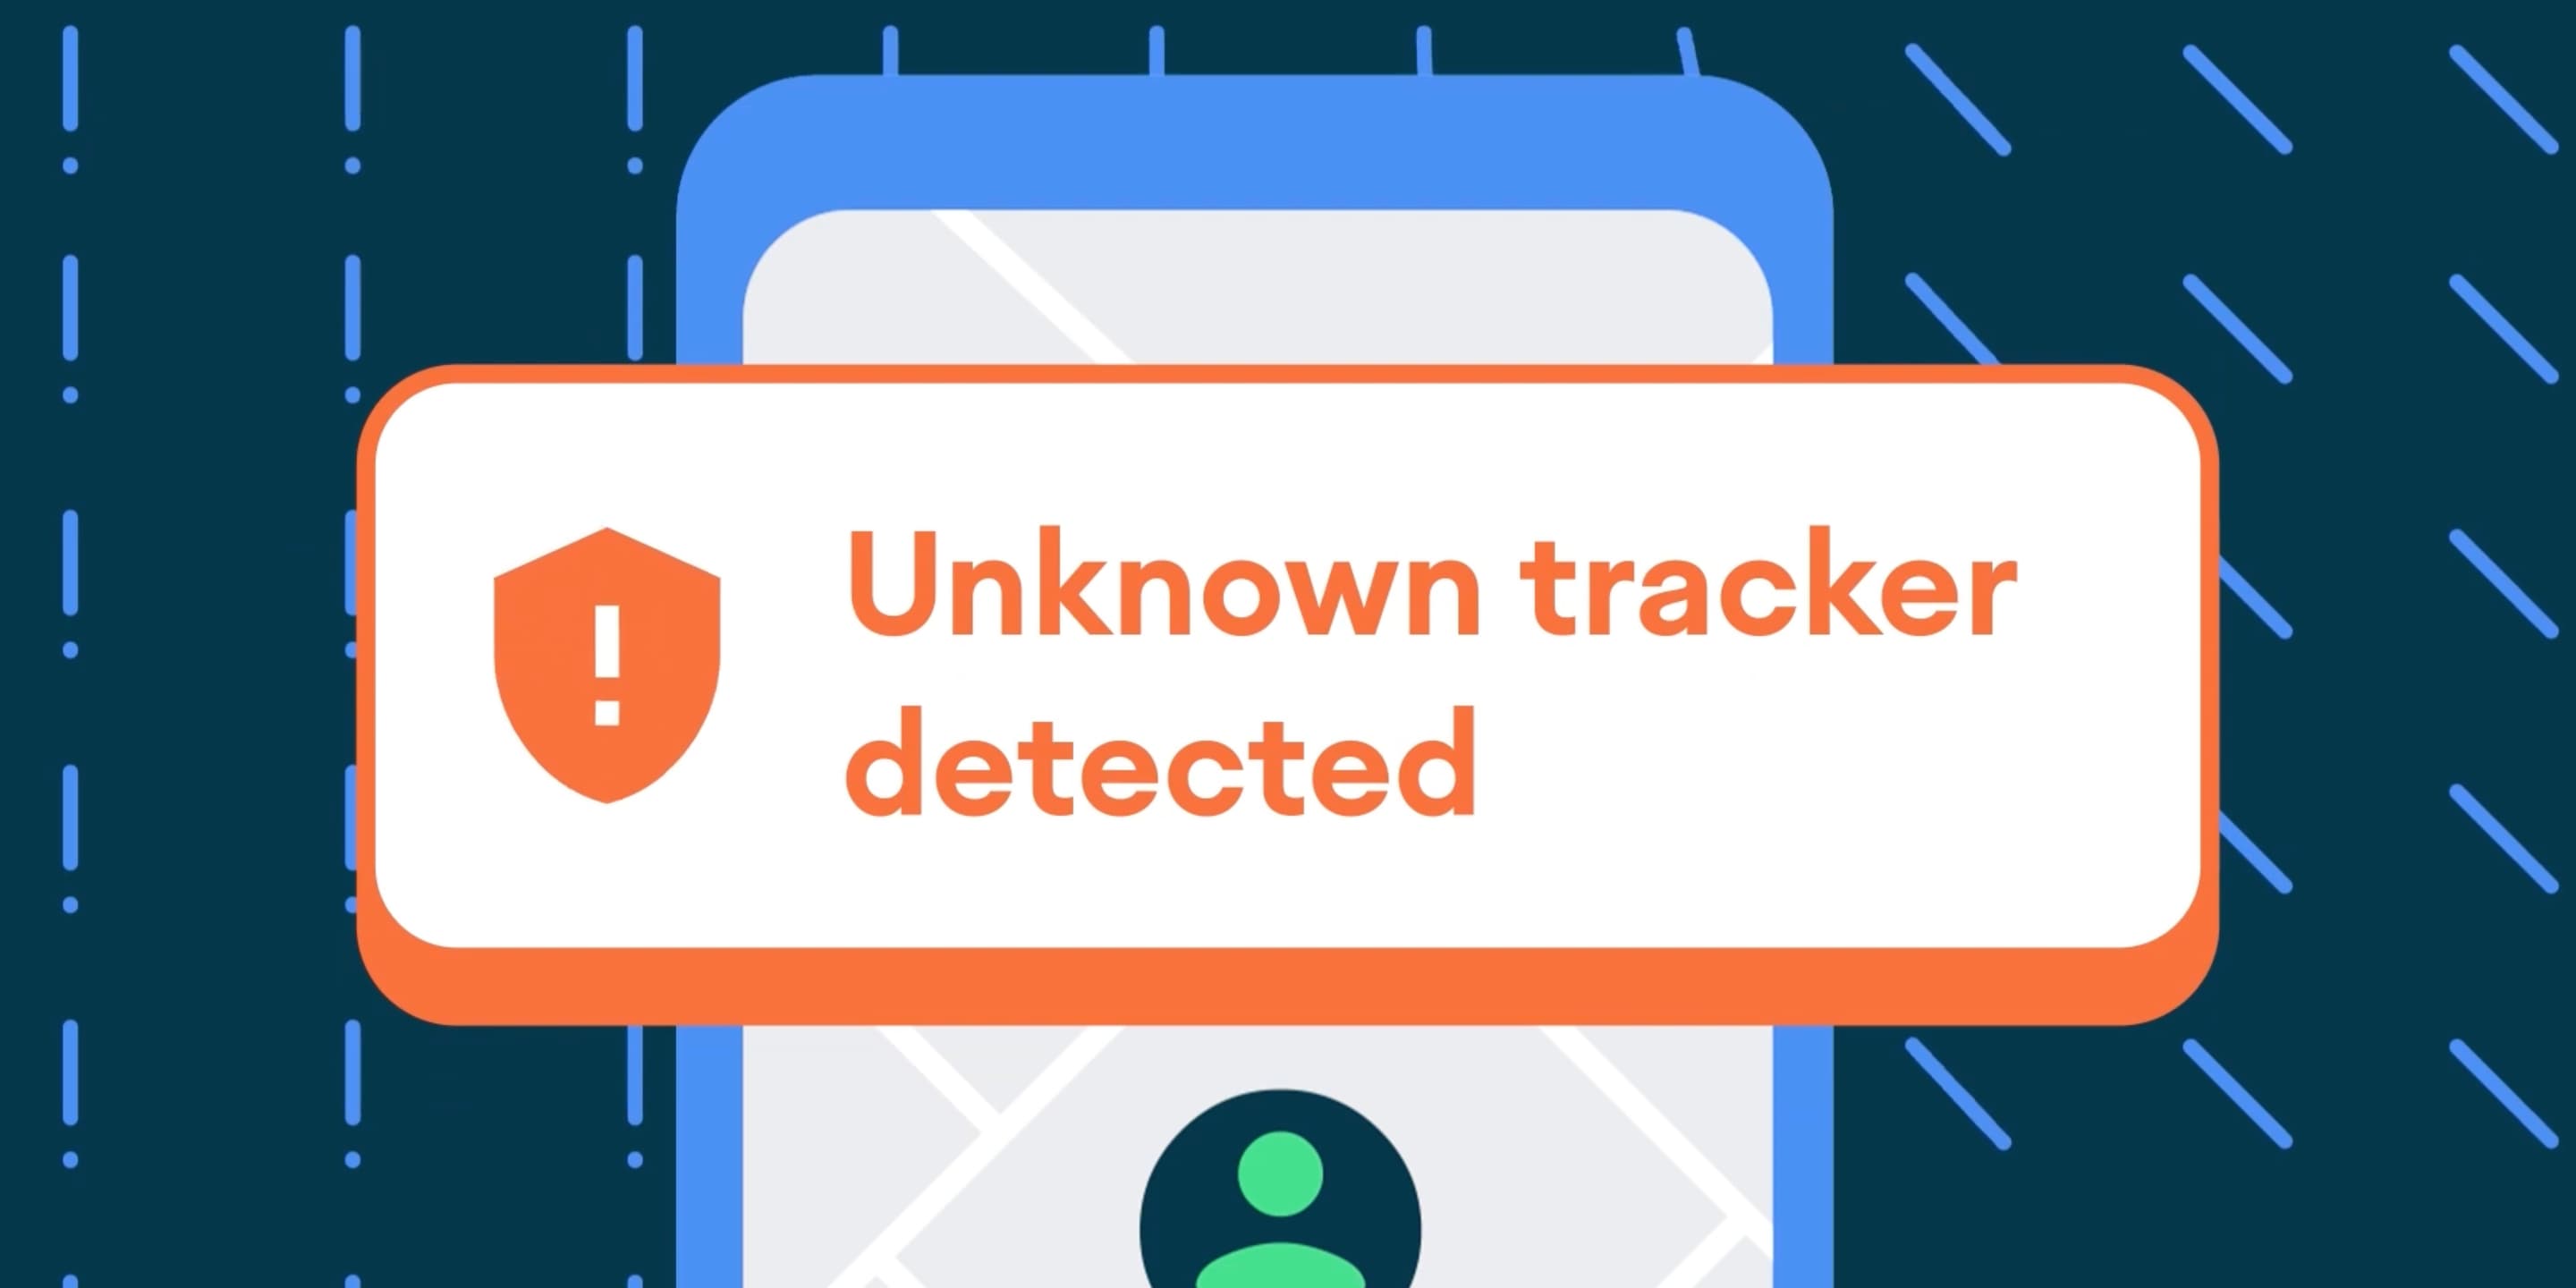 Google Rolls Out Apple AirTag Detection With Unwanted Tracking